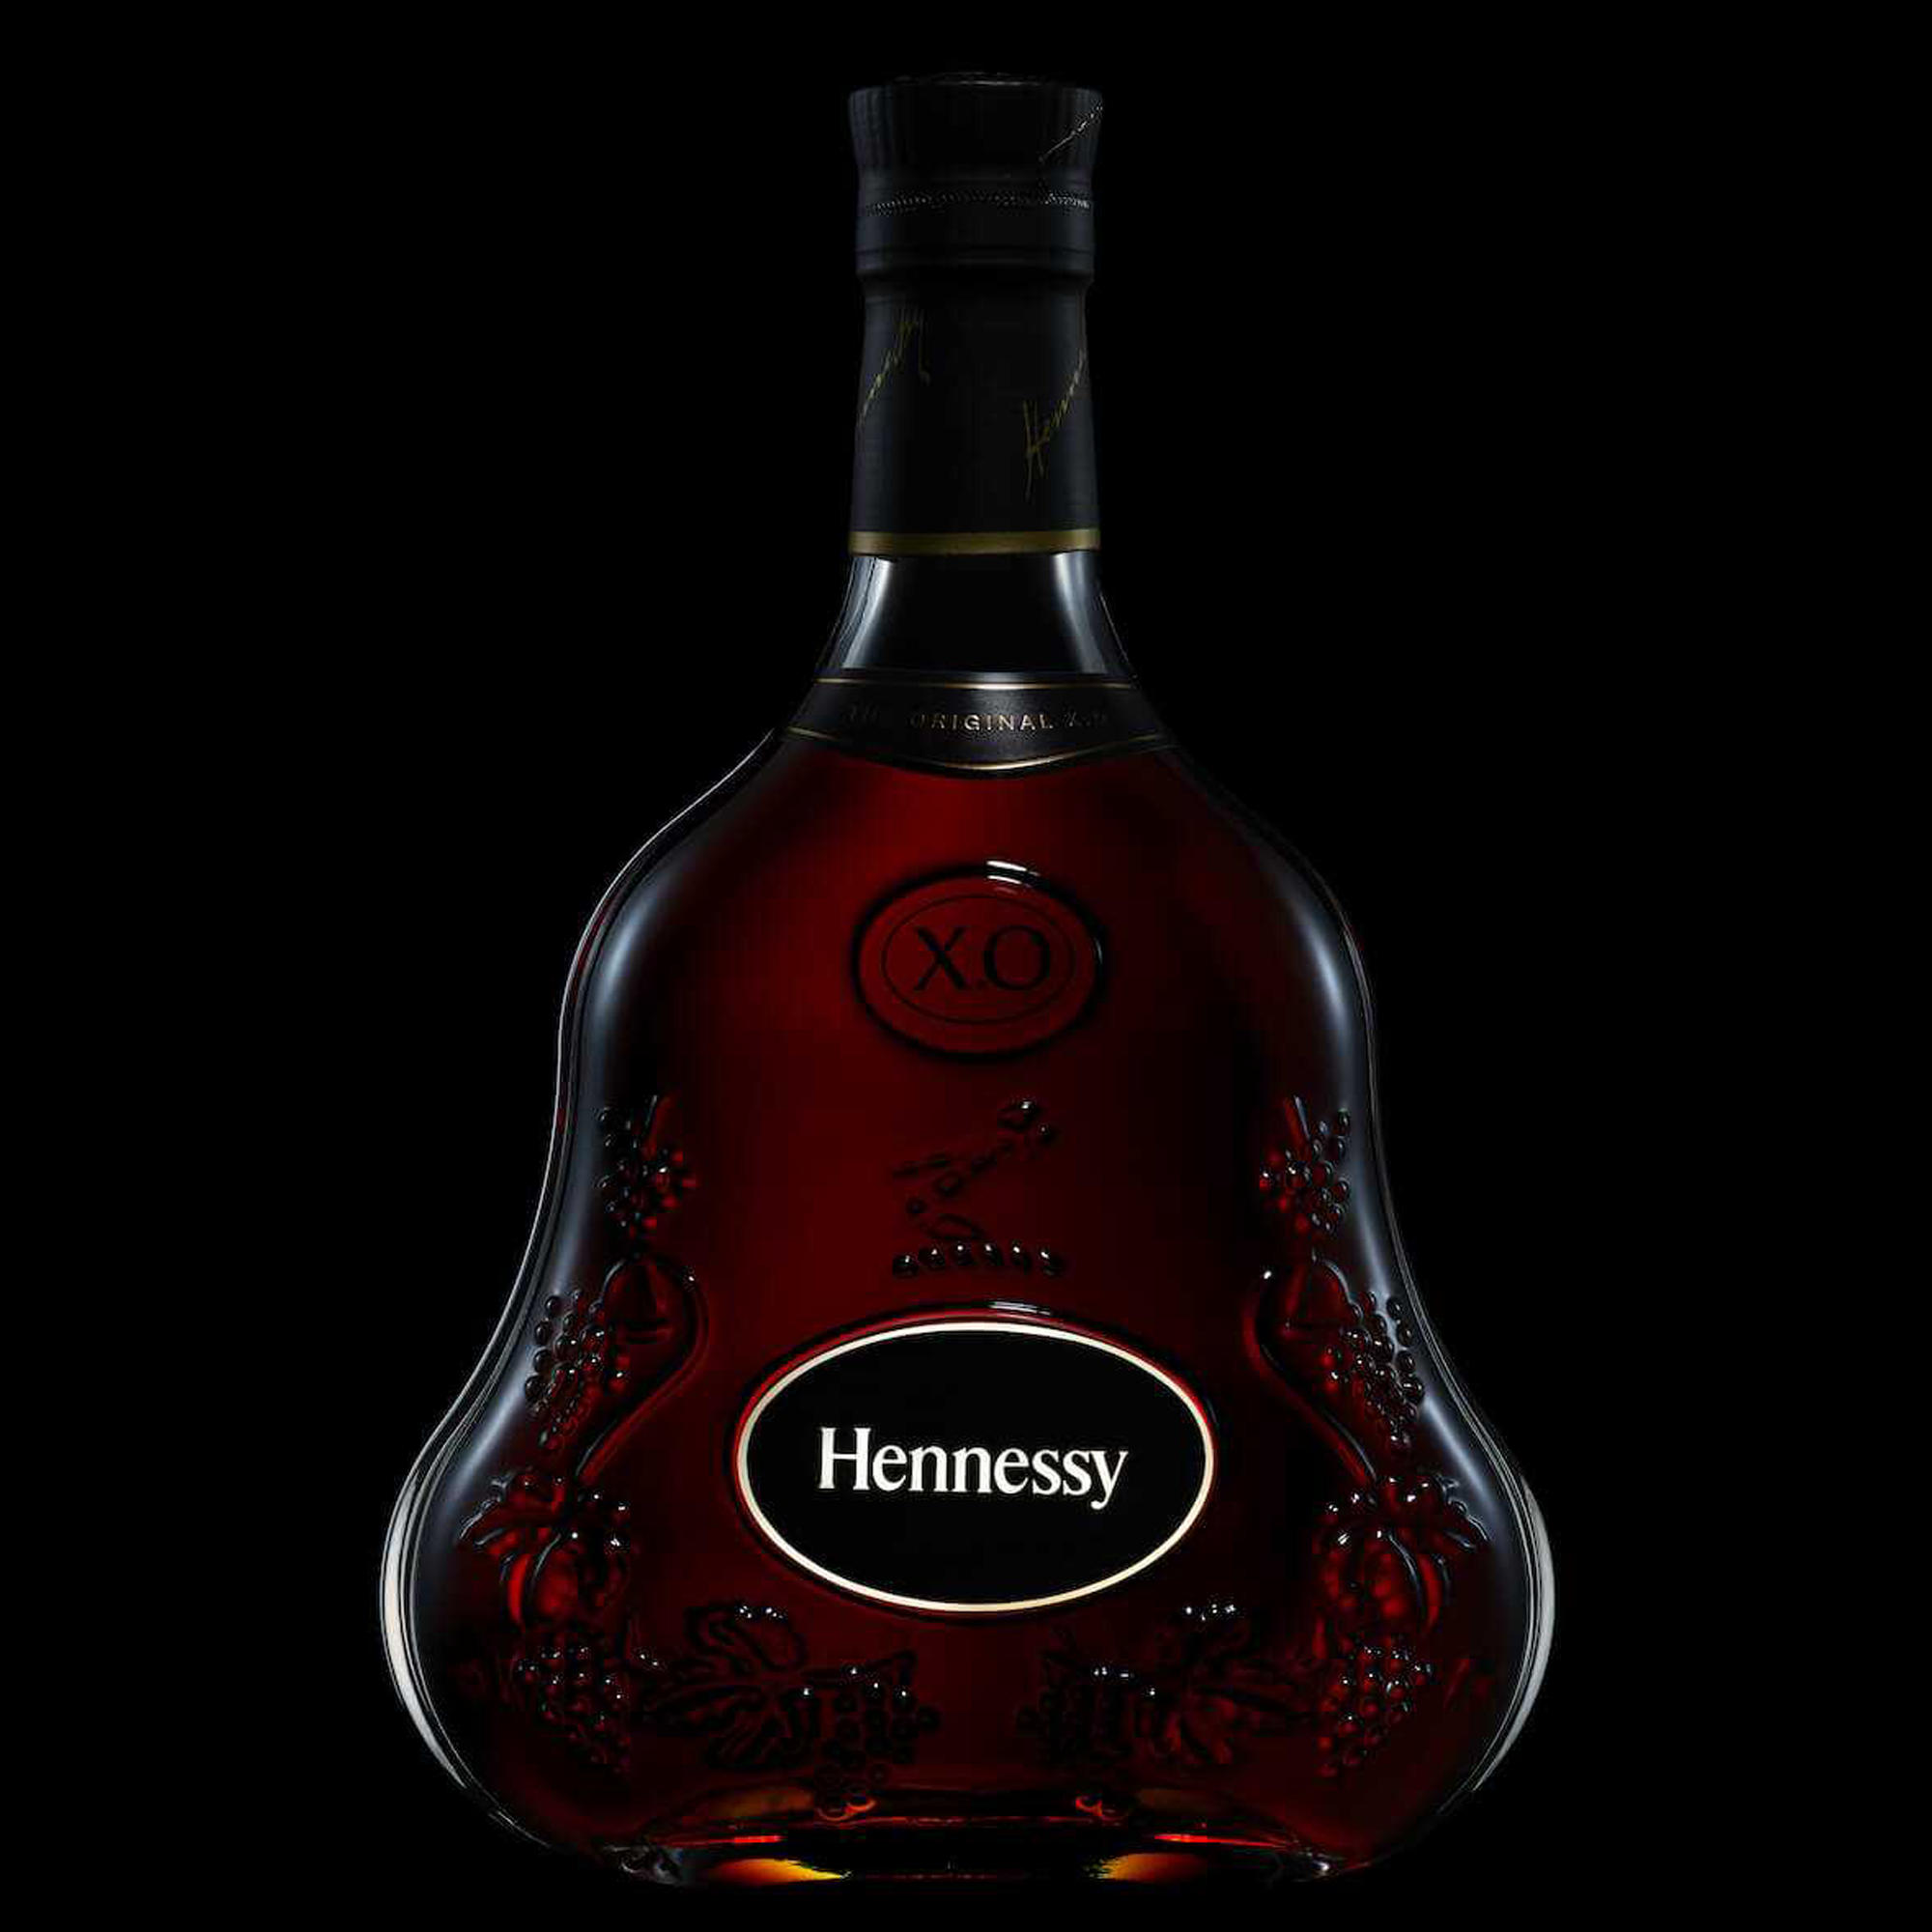 Hennessy XO Cognac - Last-Minute Gift Ideas: This Diwali, Add The